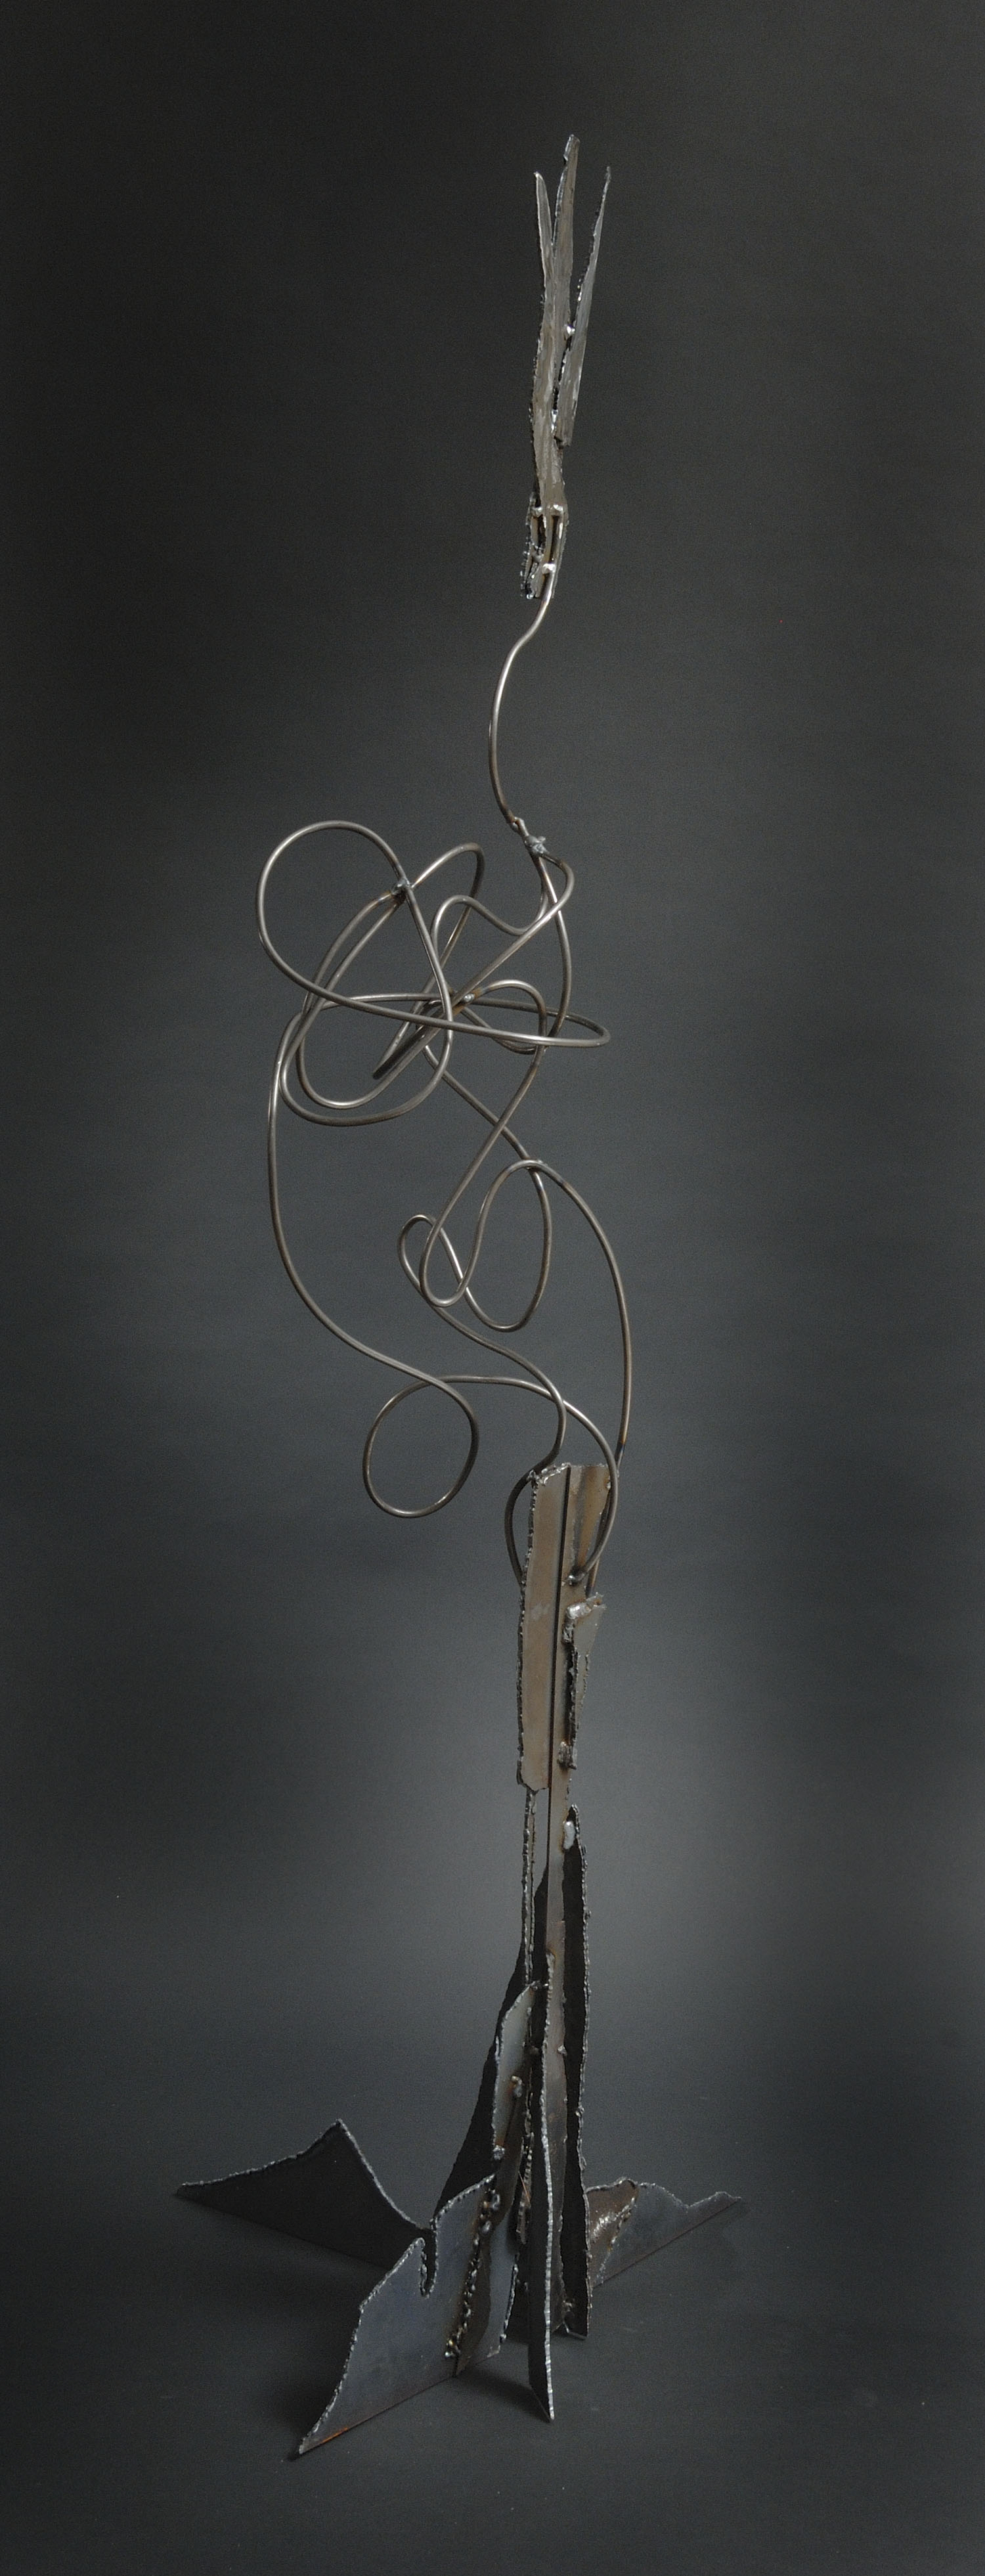 welded cut steel and steel rod make this strong and humorous cornstalk.